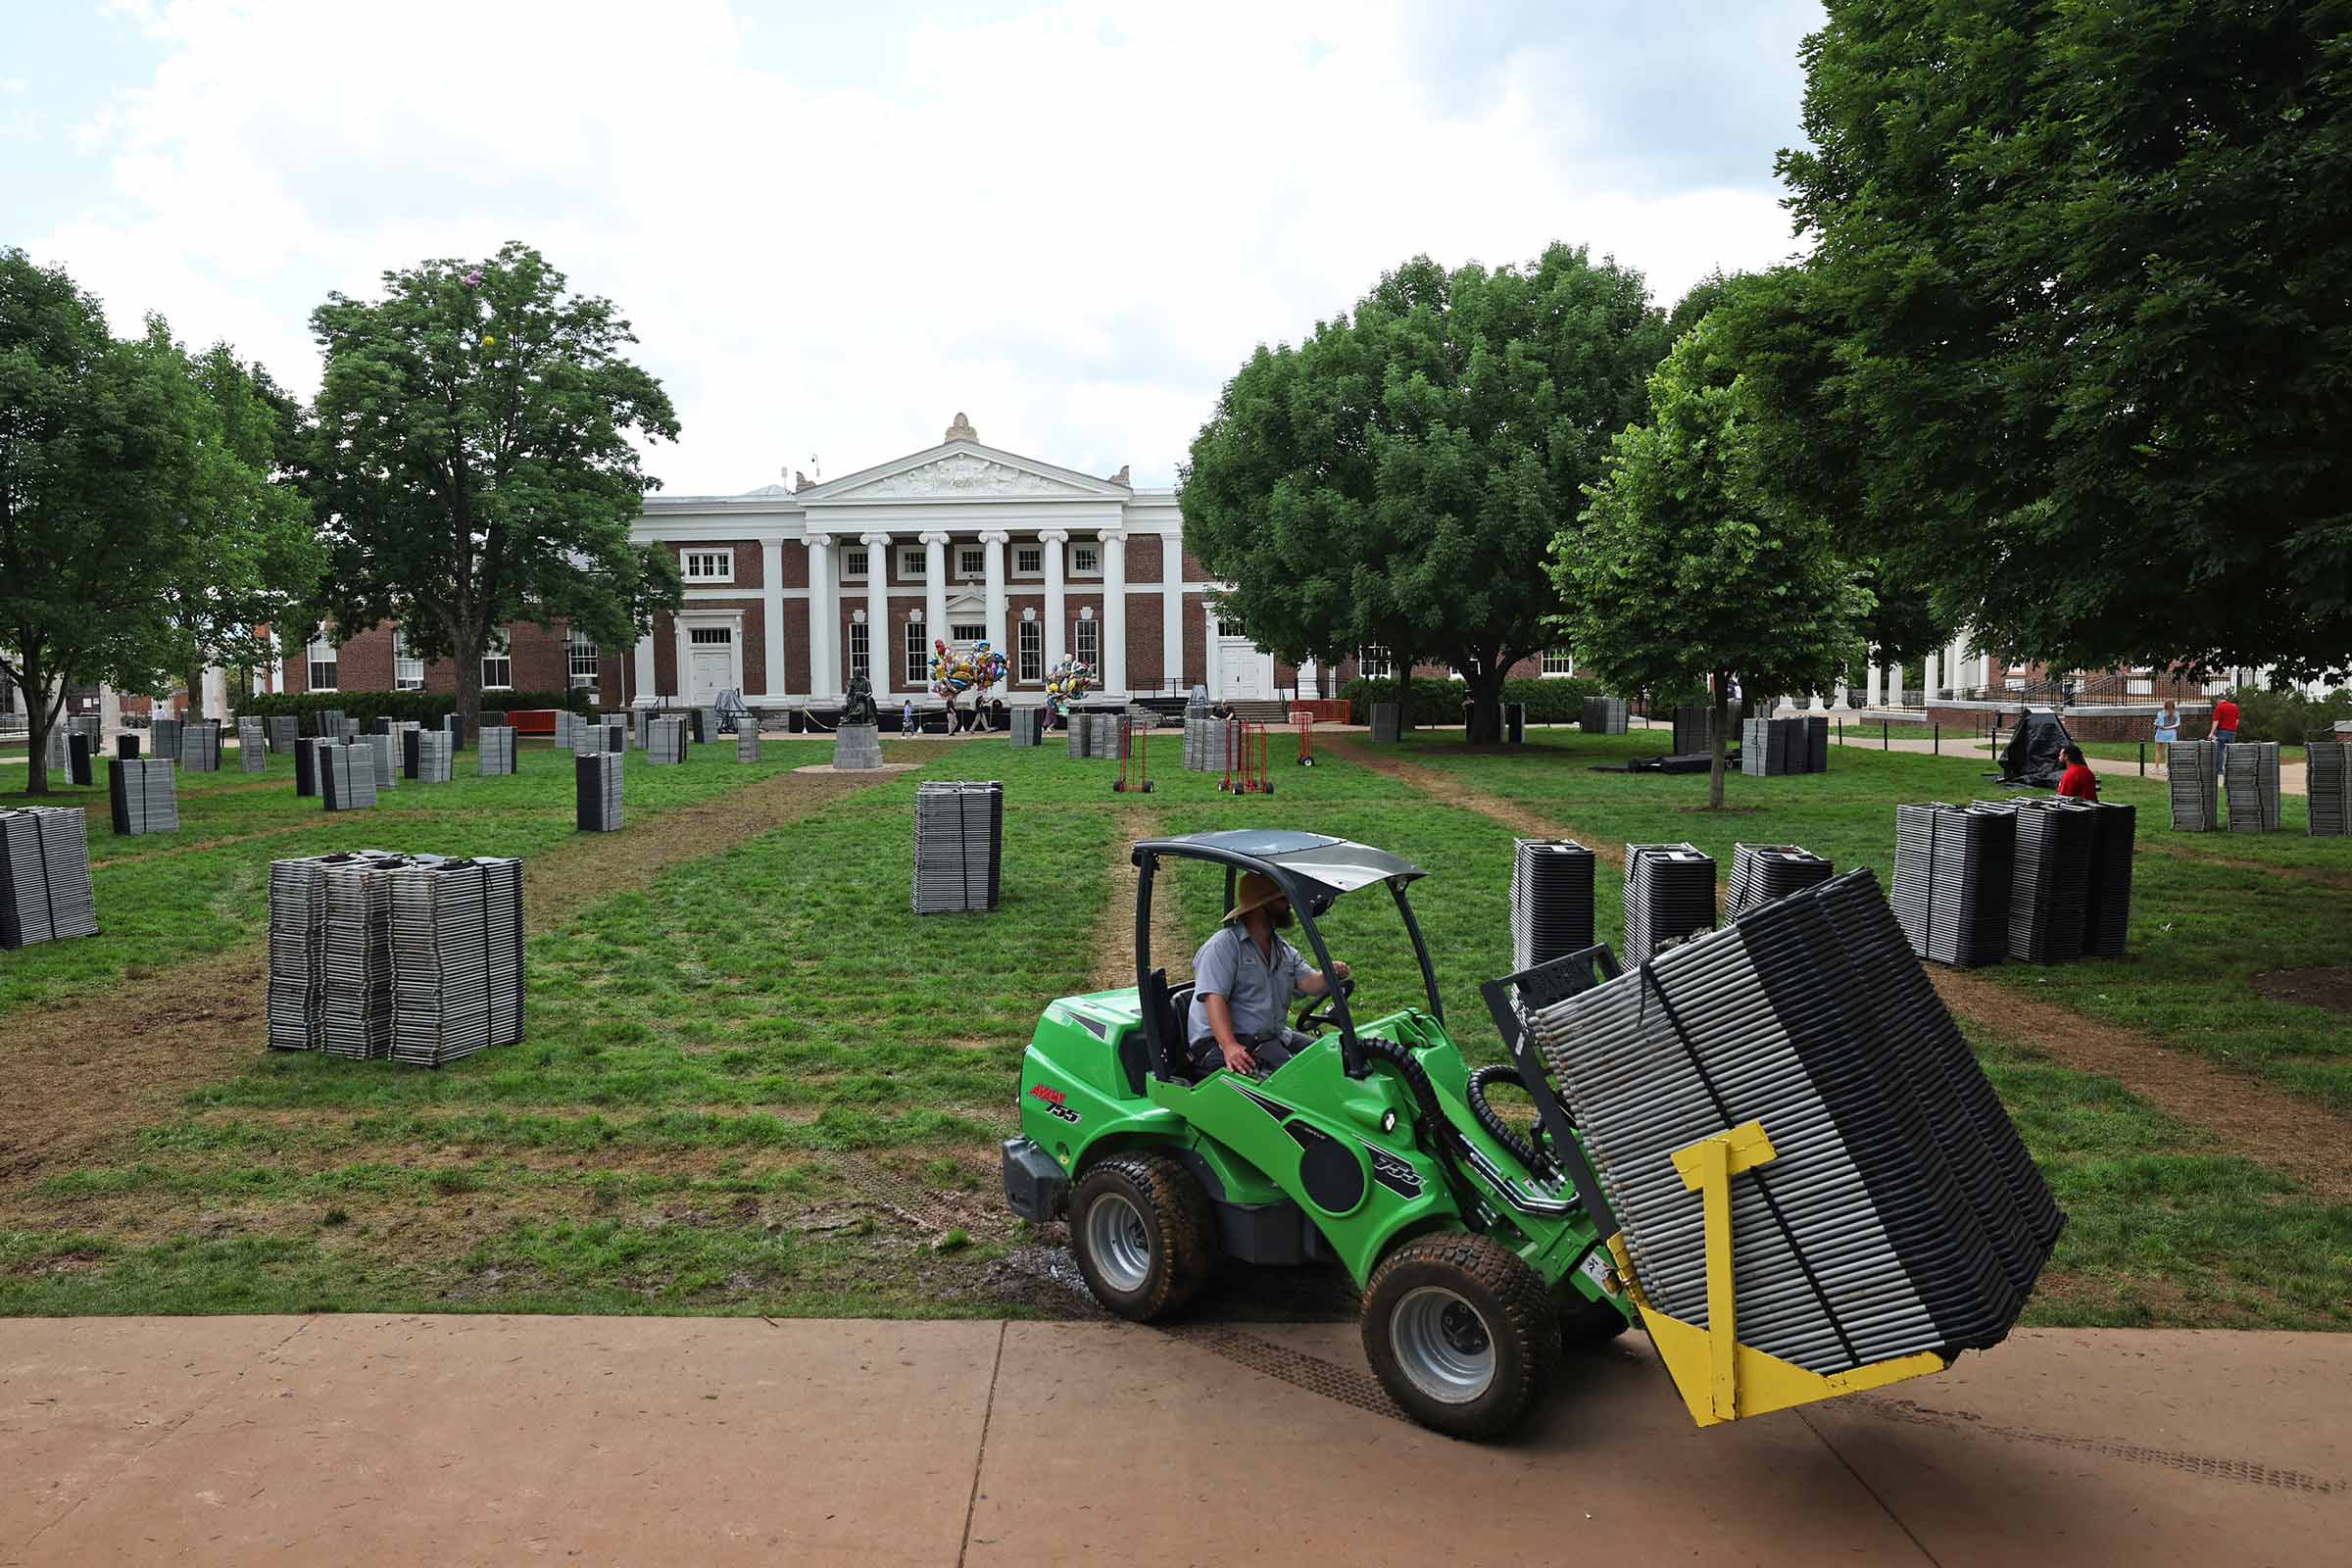 Landscapers stacked chairs and used tractors to move them off the Lawn, the first step in repairing the grass for the upcoming Reunions Weekend. )